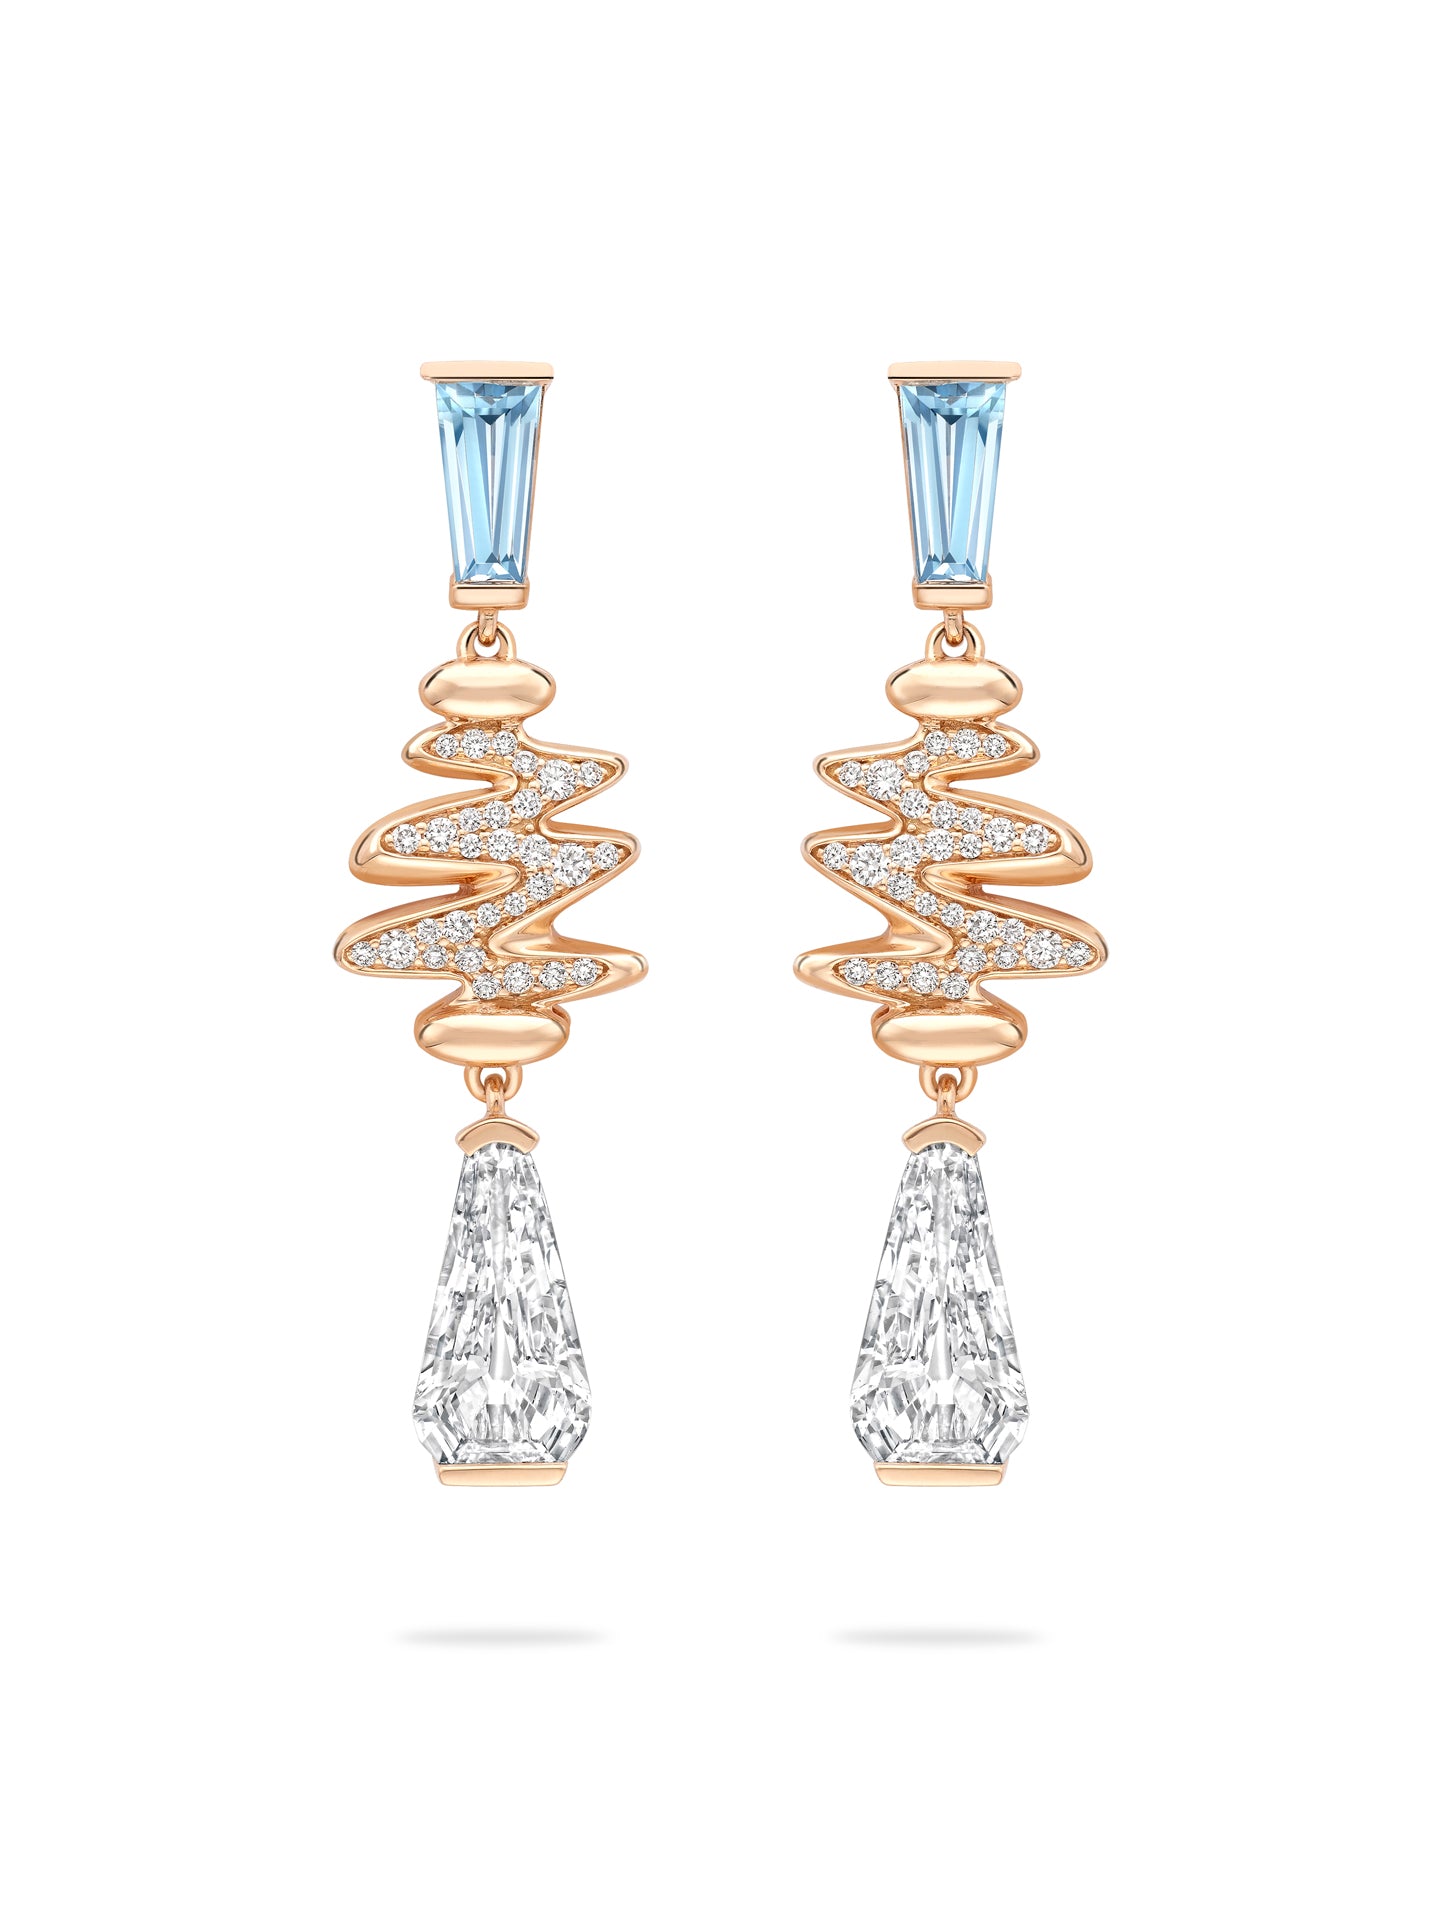 Boodles x The National Gallery Brush Strokes Diamond Rose Gold Earrings | Boodles